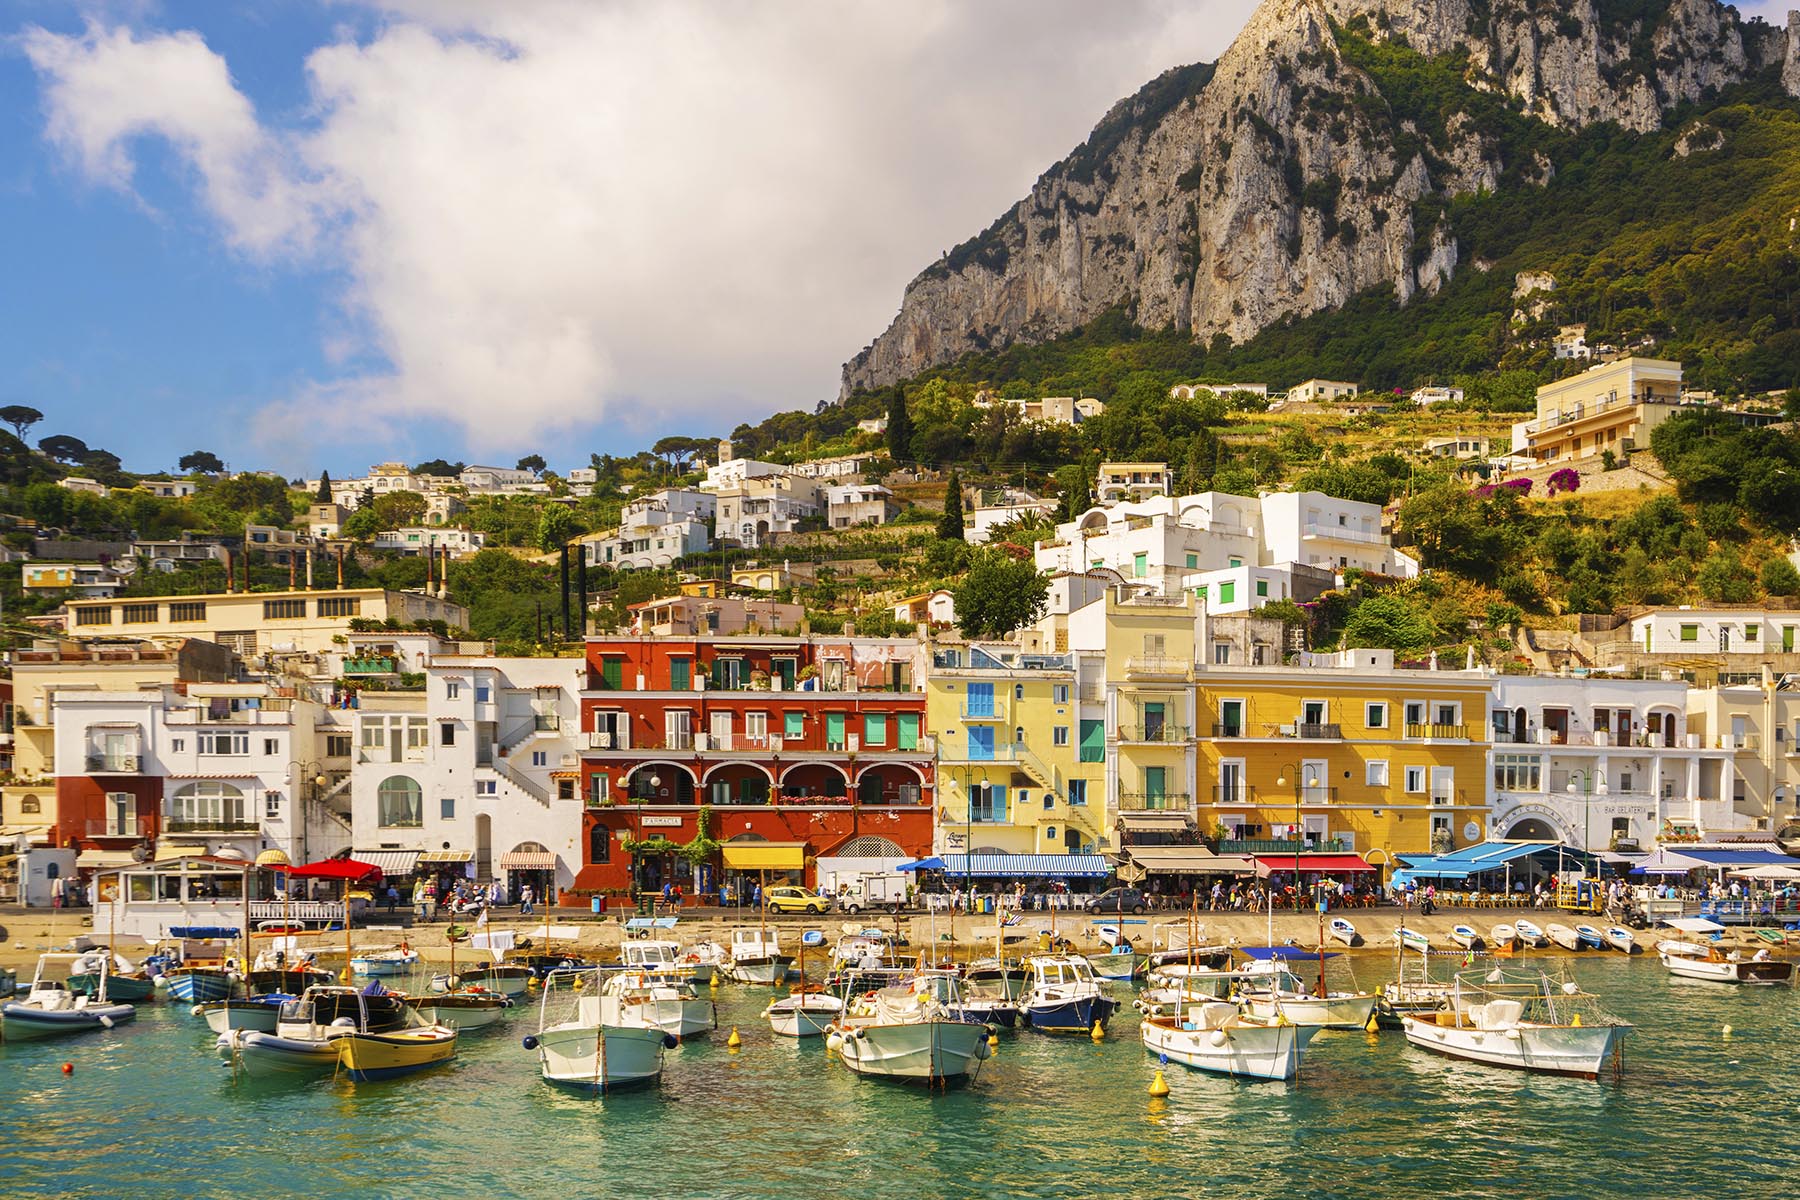 A photo of vividly hued houses on the shore of Capri, with boats anchored in the water out front.